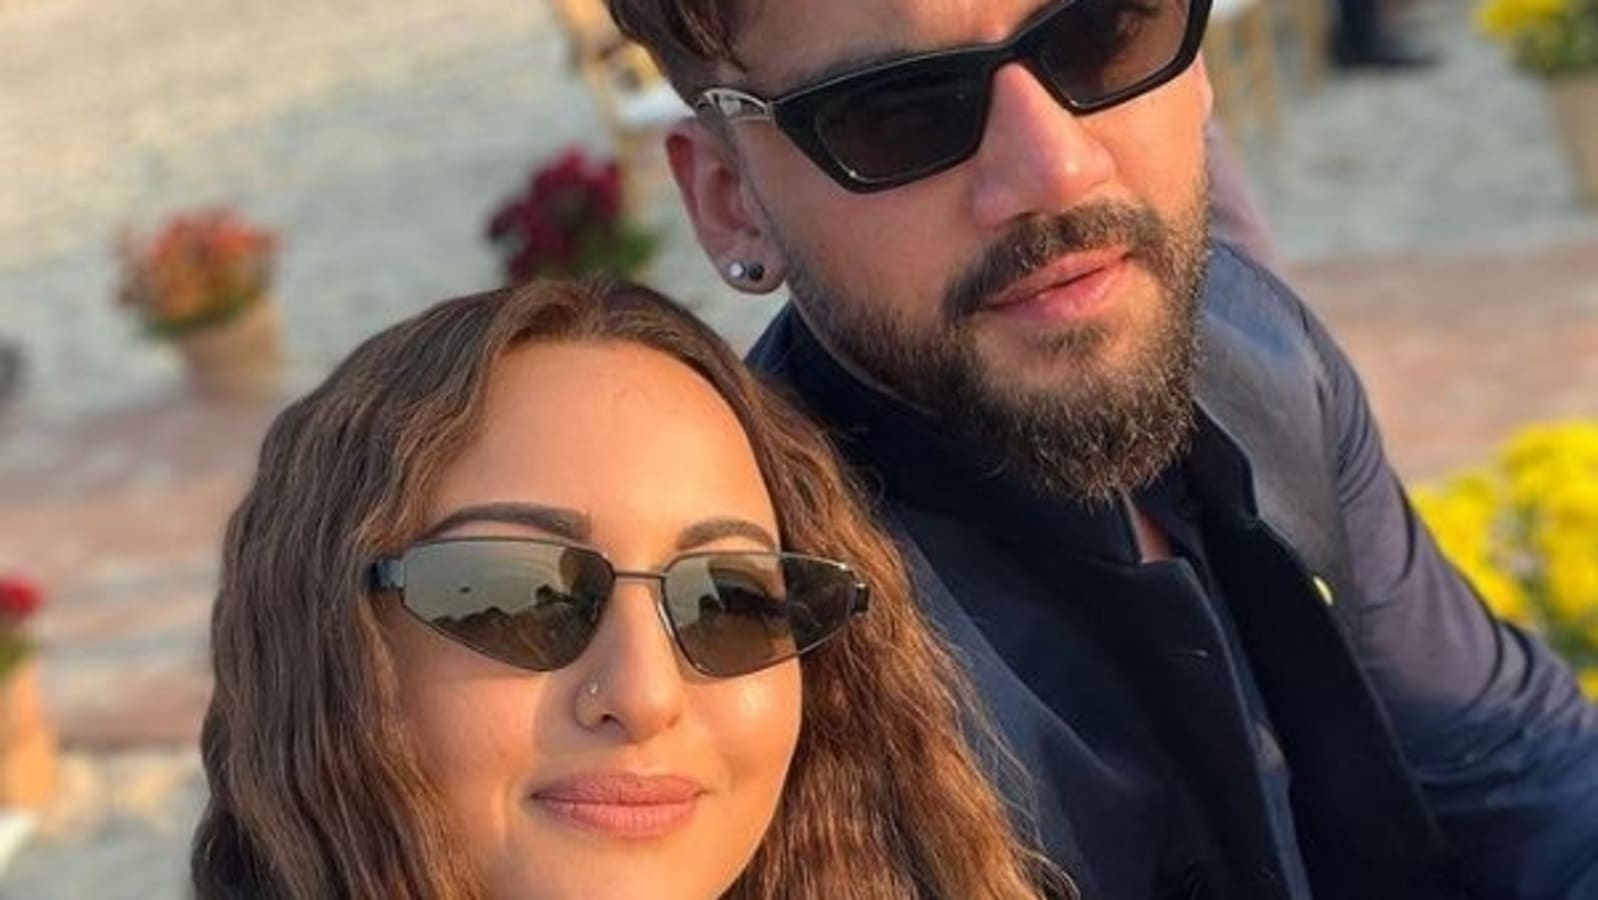 Sonakshi Sinha and Zaheer Iqbal say 'I Love You' to each other. Watch video  | Bollywood - Hindustan Times